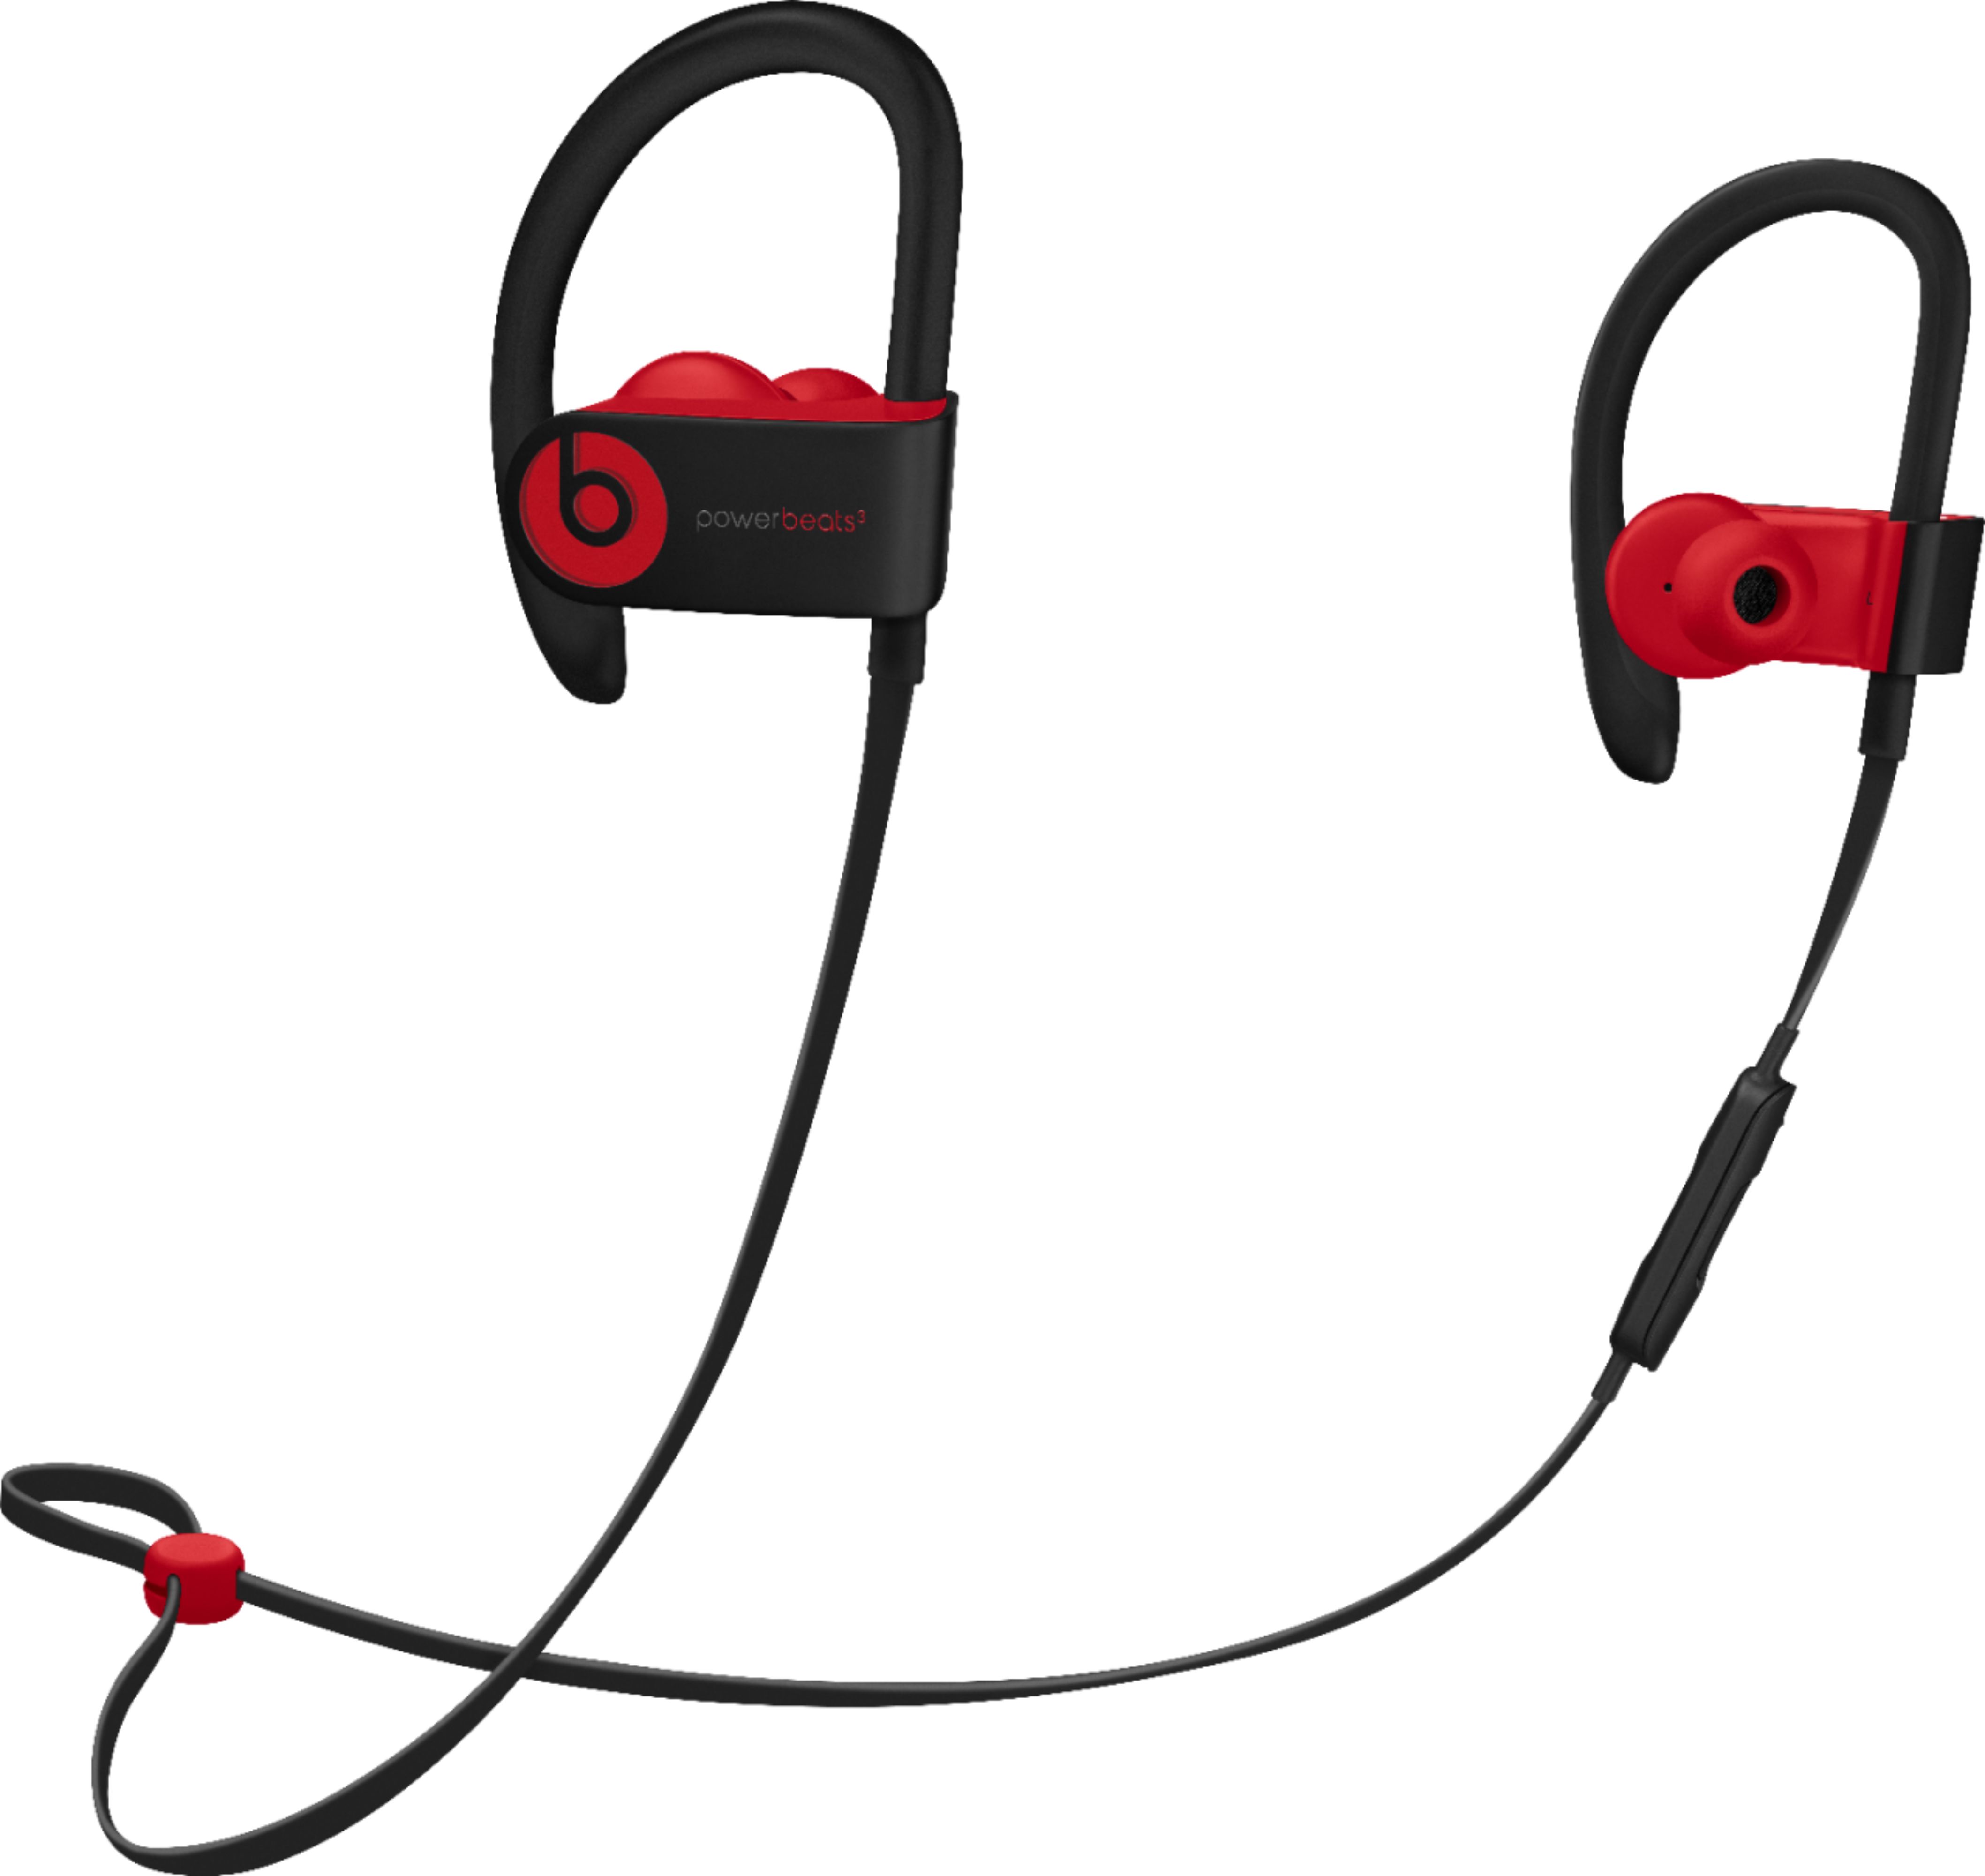 Angle View: Beats by Dr. Dre - Geek Squad Certified Refurbished Powerbeats³ Wireless Earphones - The Beats Decade Collection - Defiant Black-Red